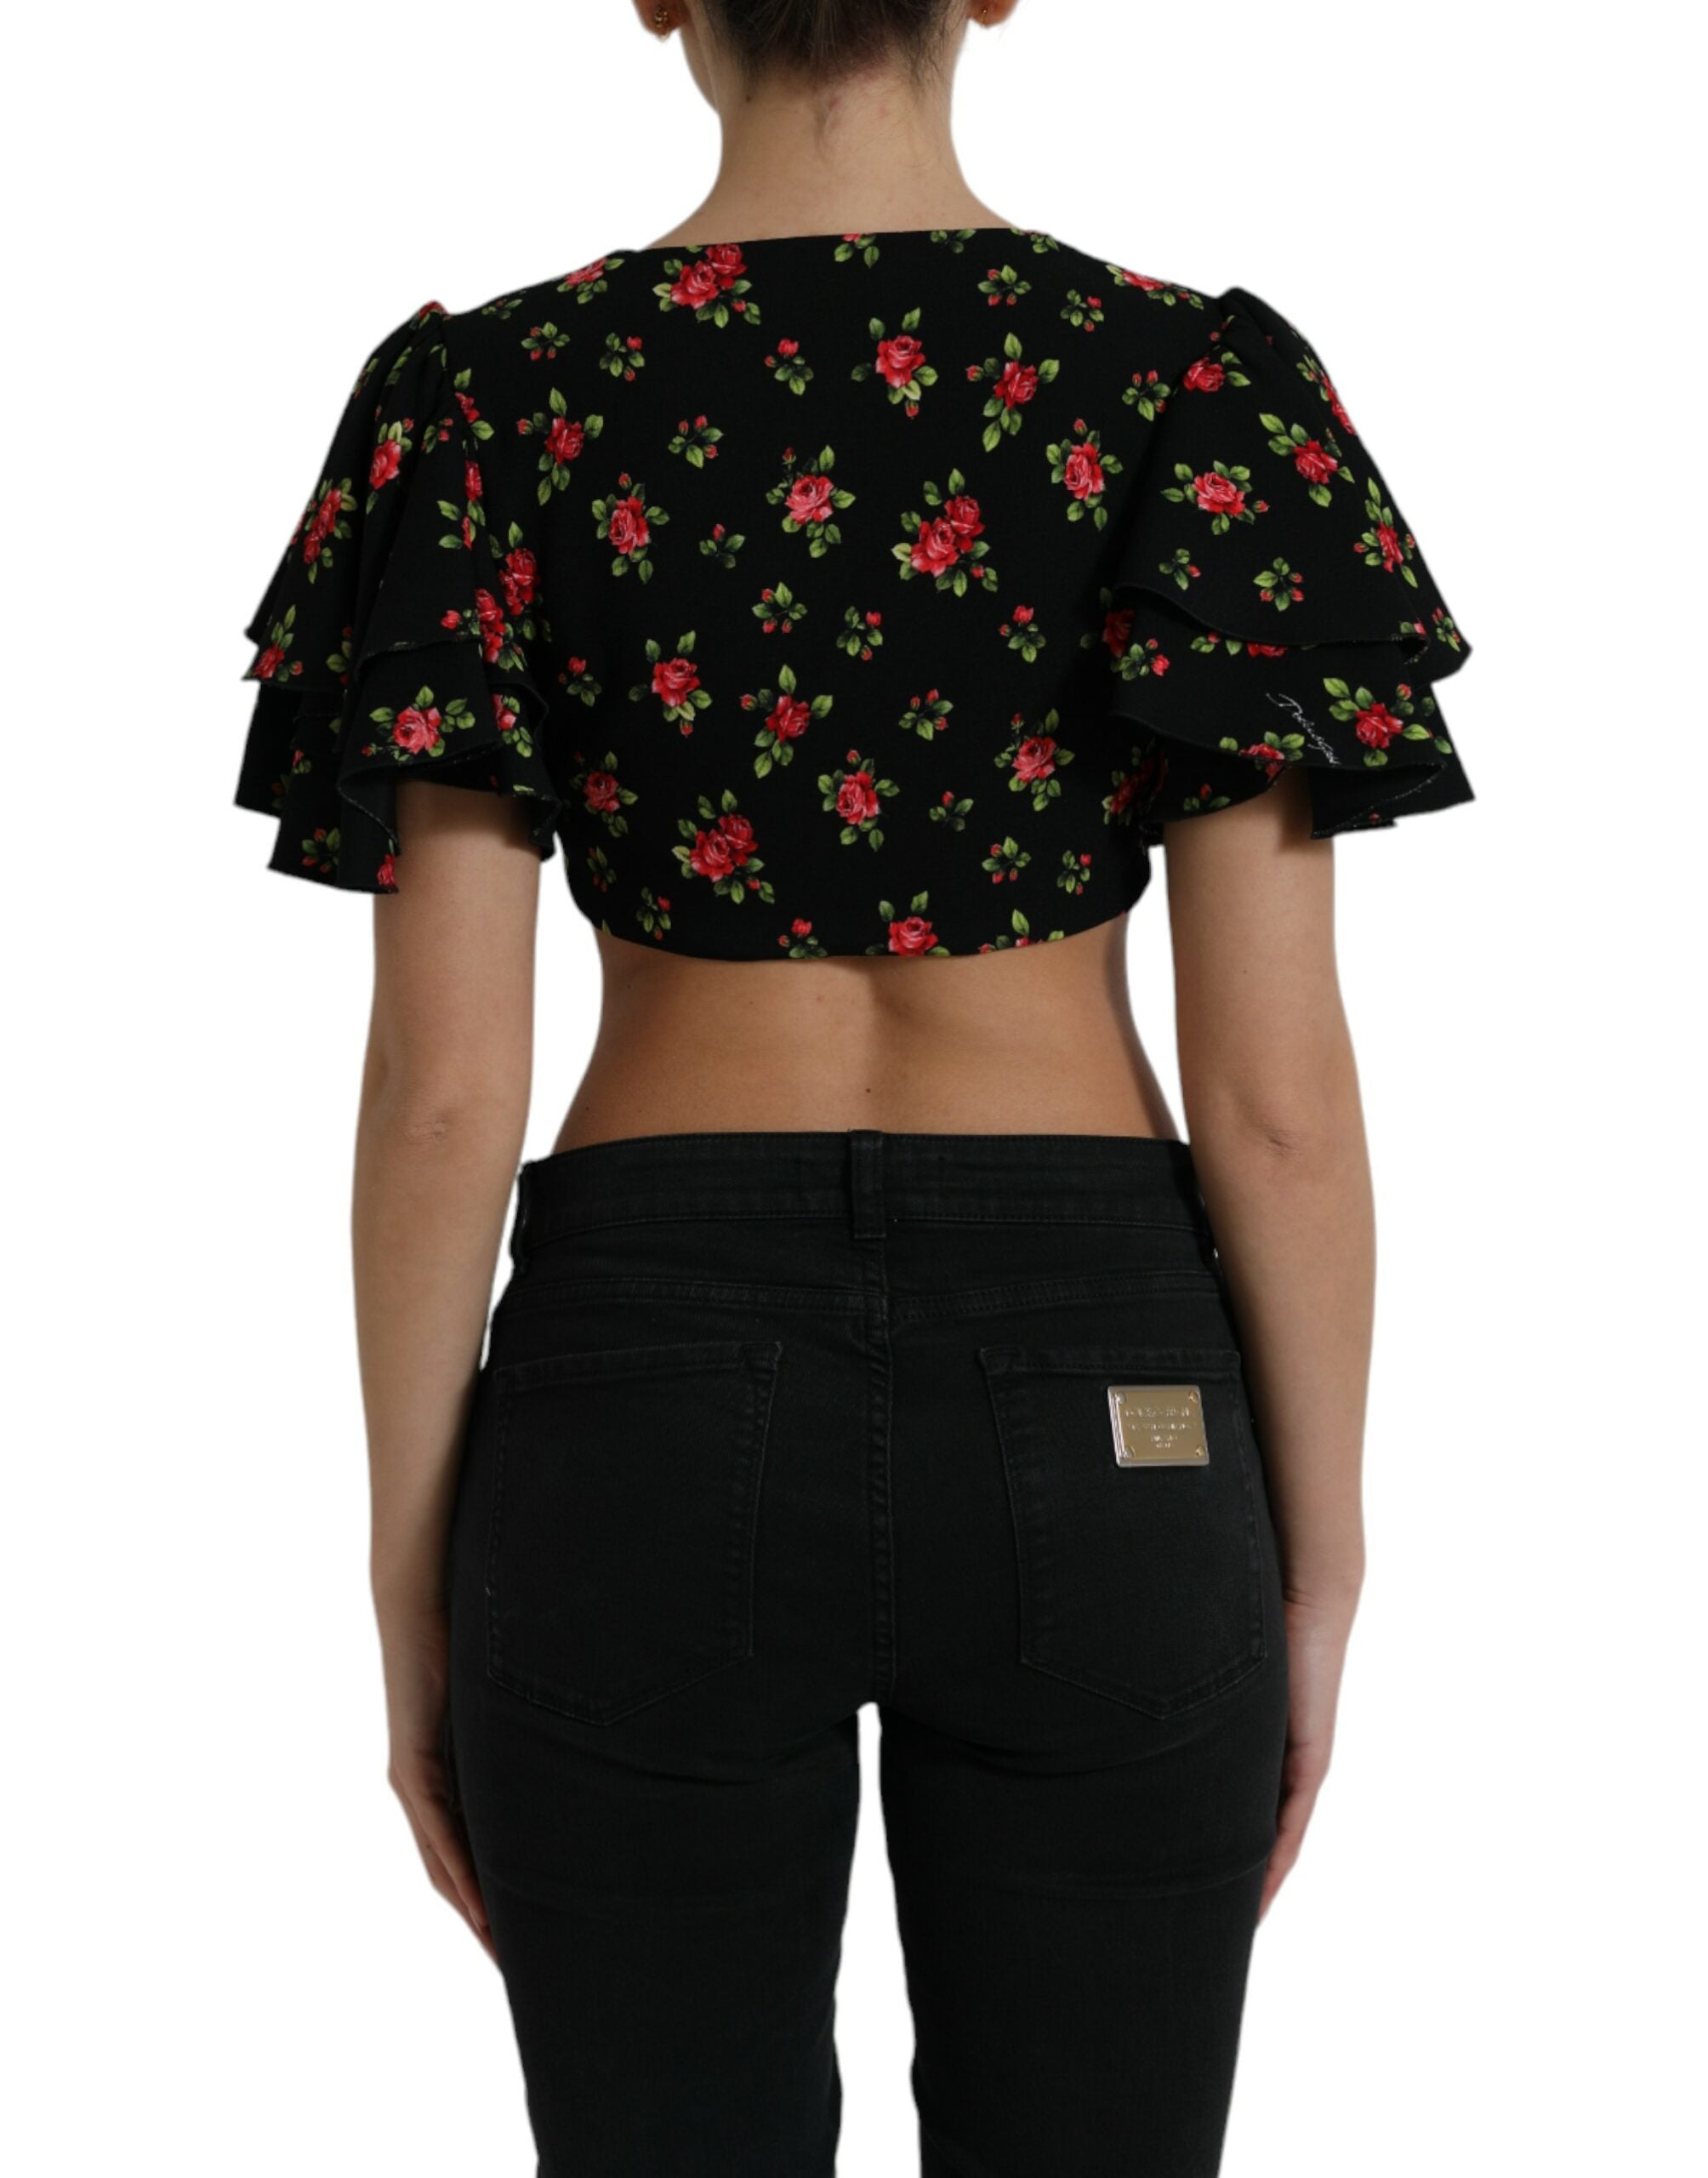 Dolce & Gabbana Floral Print Cropped Top Luxe Fashion